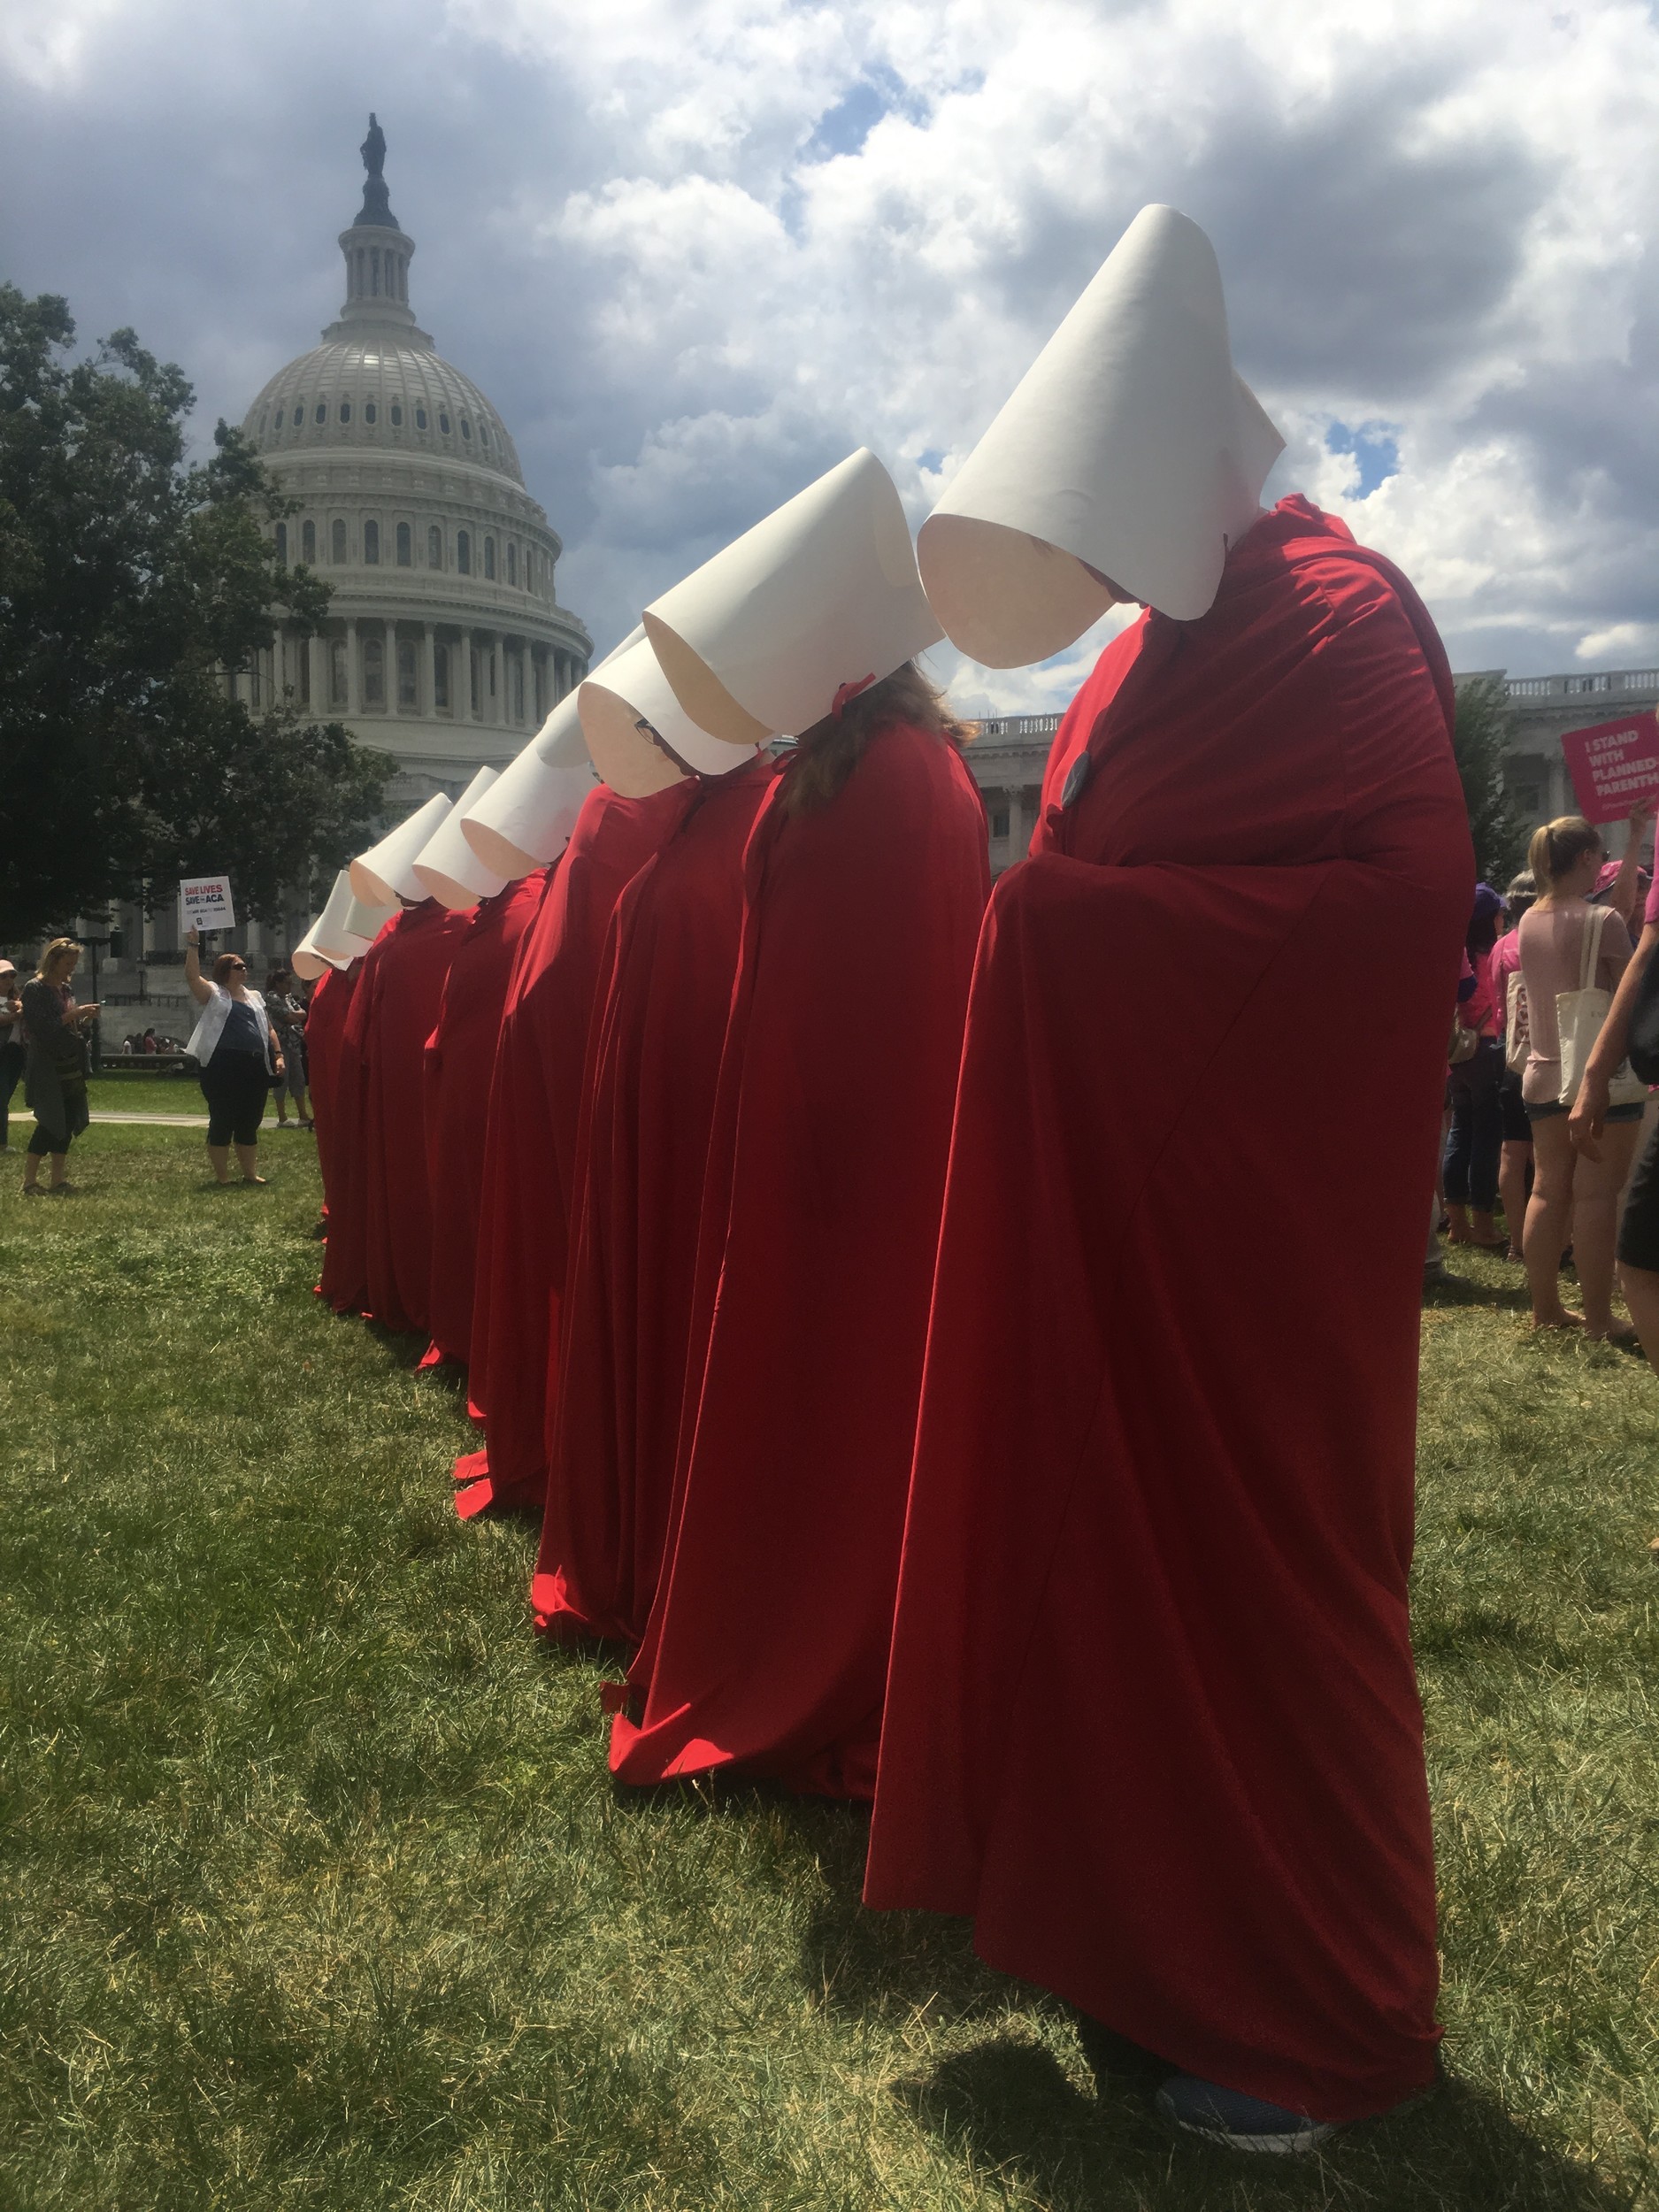 lanned Parenthood volunteers donned outfits worn by a fictional caste of women forced into sexual servitude in Margaret Atwood’s dystopian novel “The Handmaid’s Tale,” at a rally in the capital.